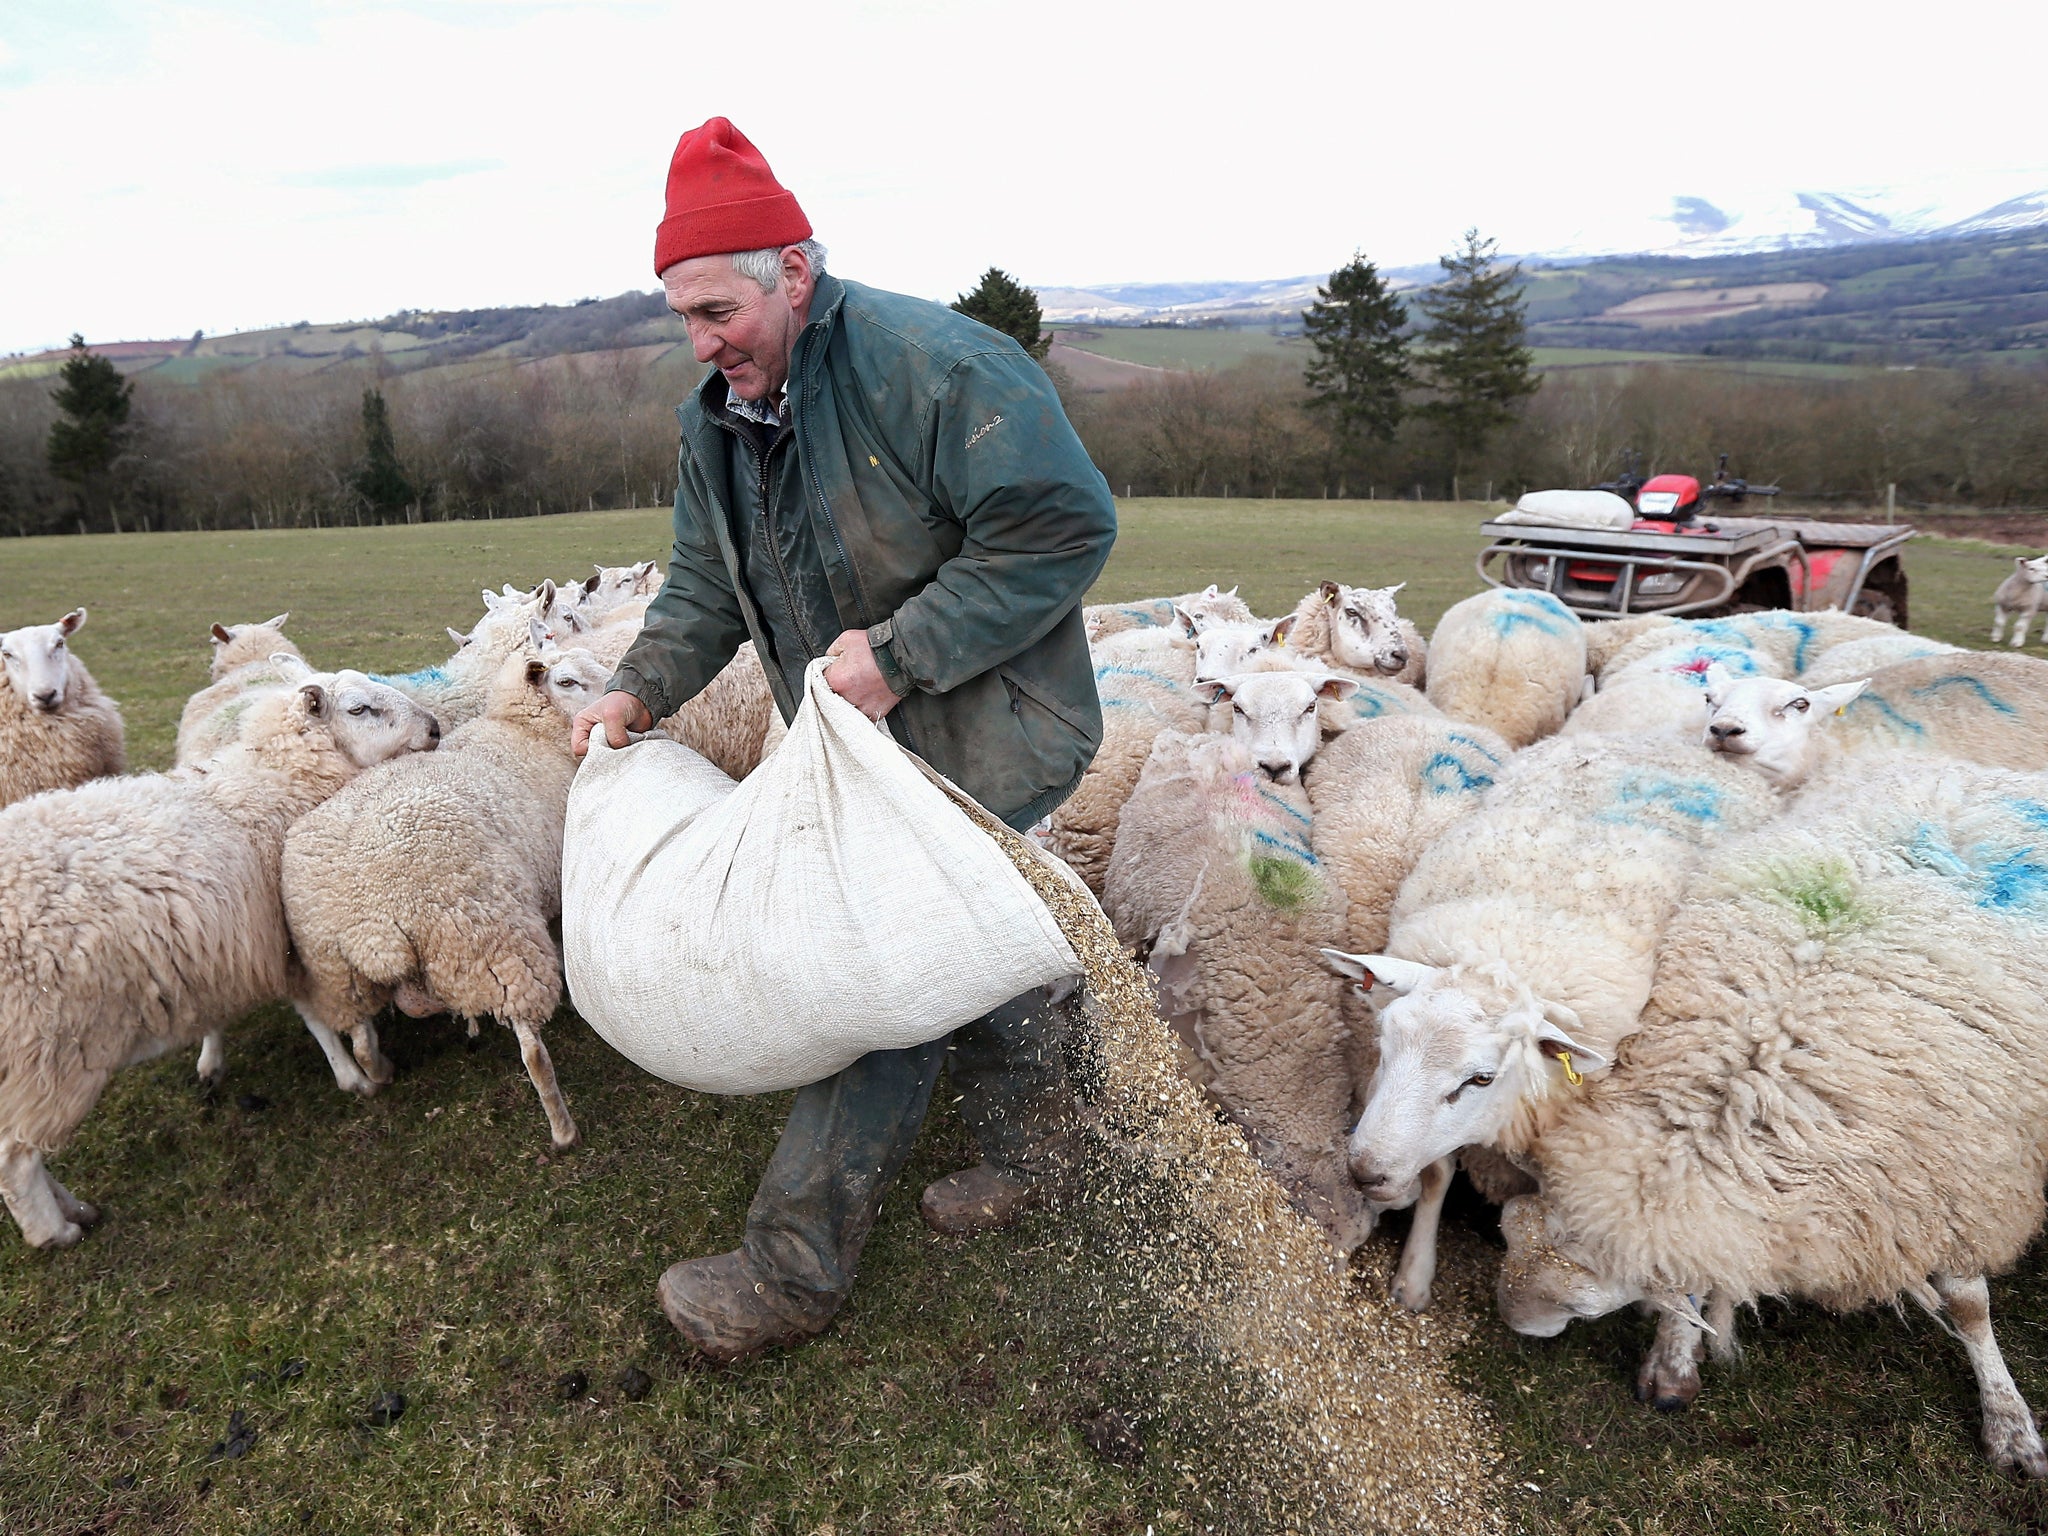 Hard work on the hills: farmer Dai Brute feeds sheep in Brecon, Wales